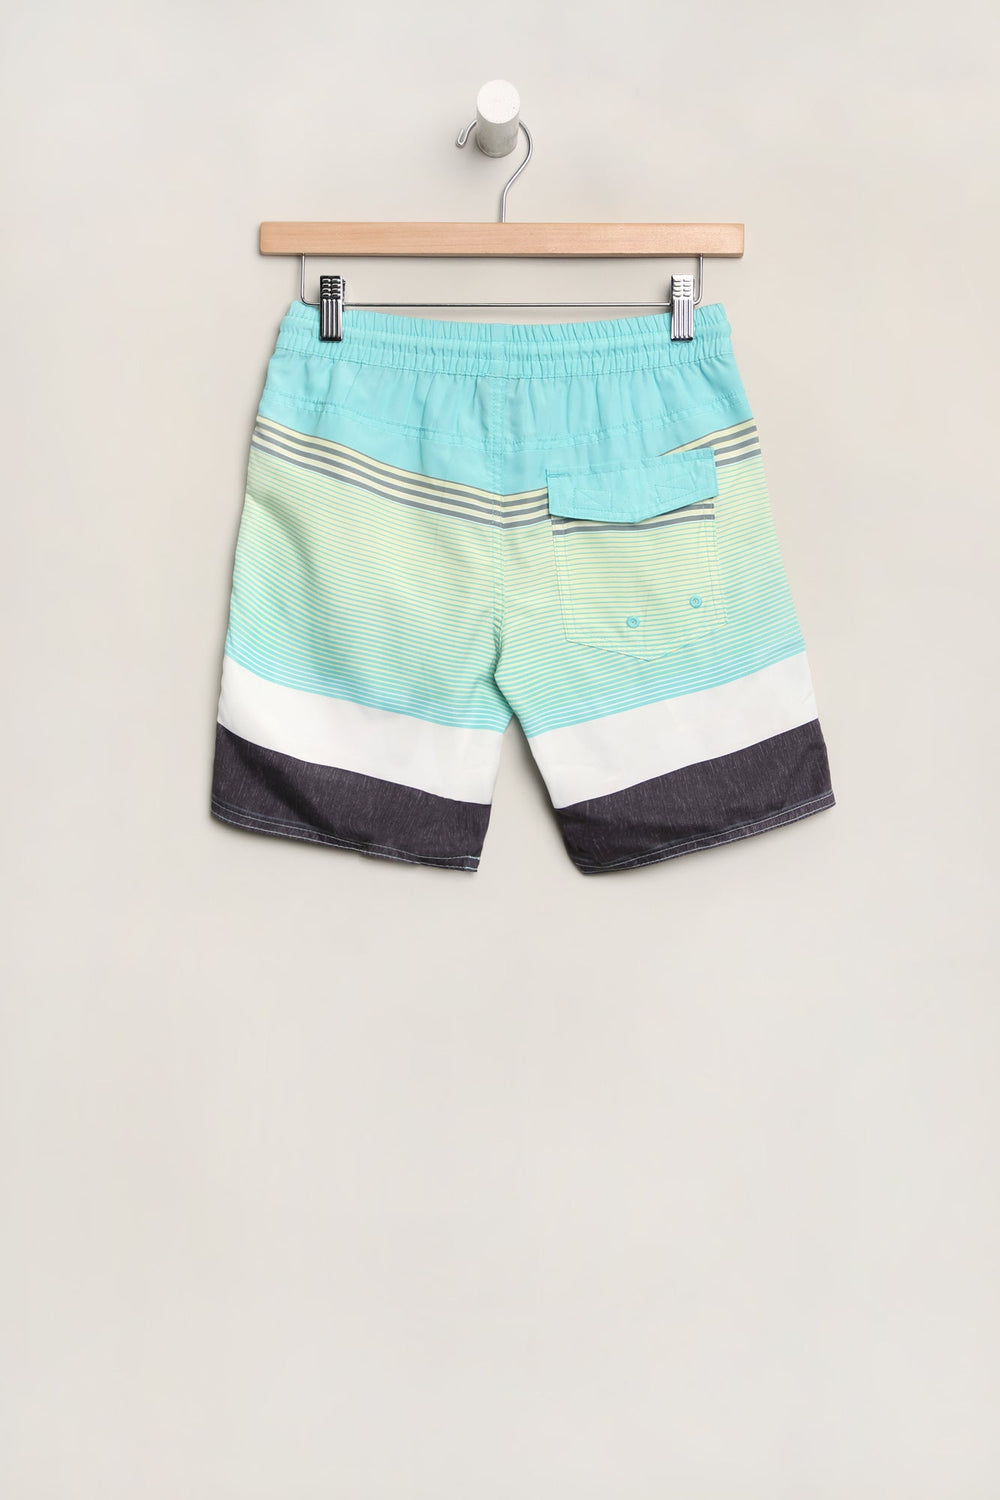 West49 Youth Colour Block Beach Shorts West49 Youth Colour Block Beach Shorts